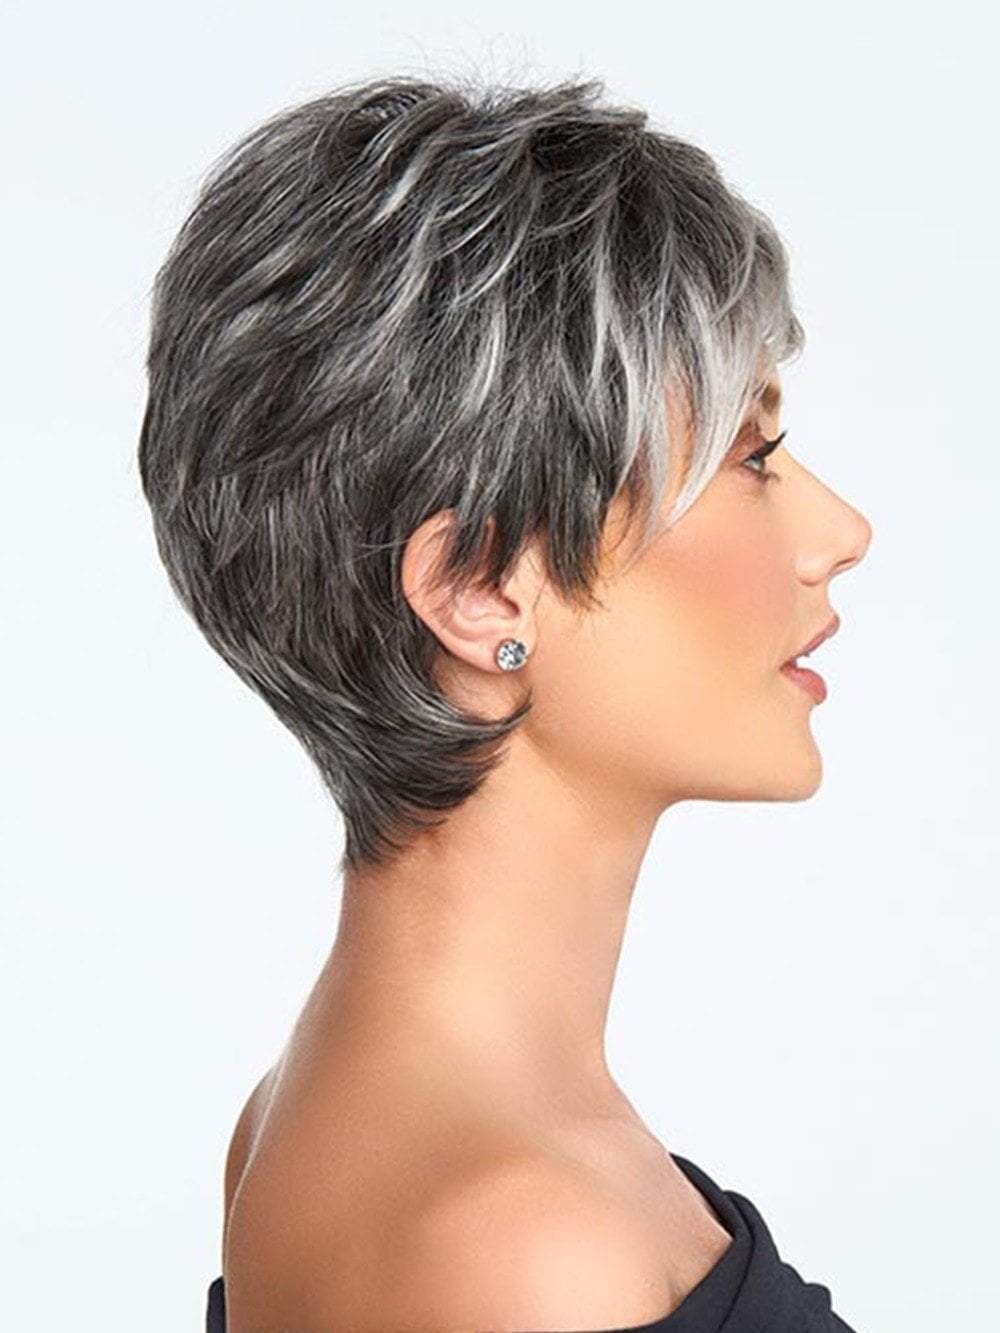 The slightly angled fringe can be worn onto the face or swept away while the razor cut nape creates a soft clean look in the back